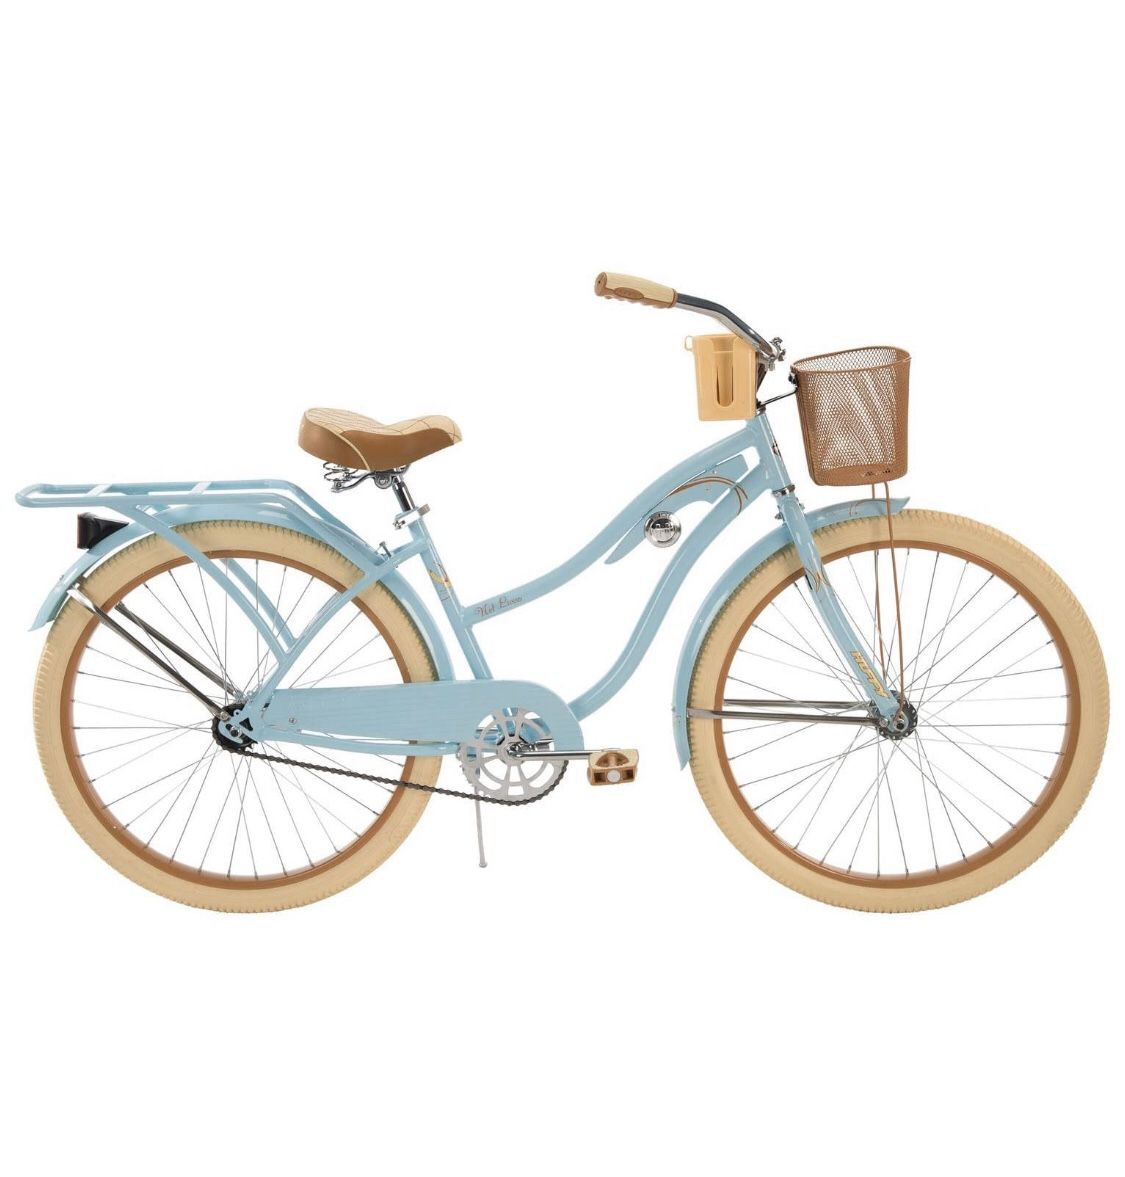 Huffy 26 inch ladies women’s cruiser bike with basket and cup holder